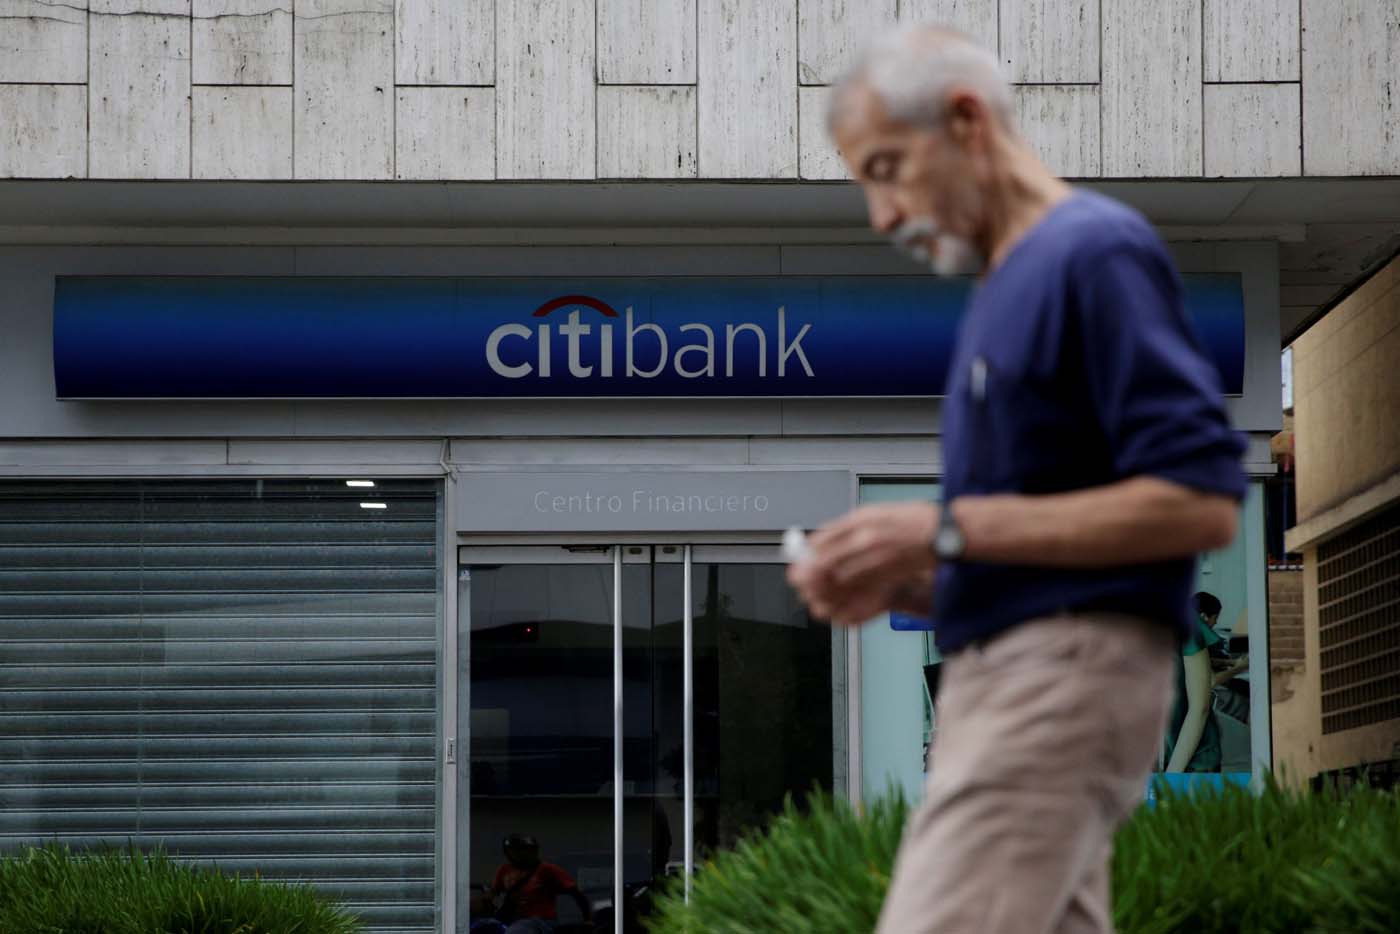 A man walks past a branch of Citi Bank in Caracas, Venezuela February 14, 2017. Picture taken February 14, 2017. REUTERS/Marco Bello To match Exclusive VENEZUELA-BANKS/